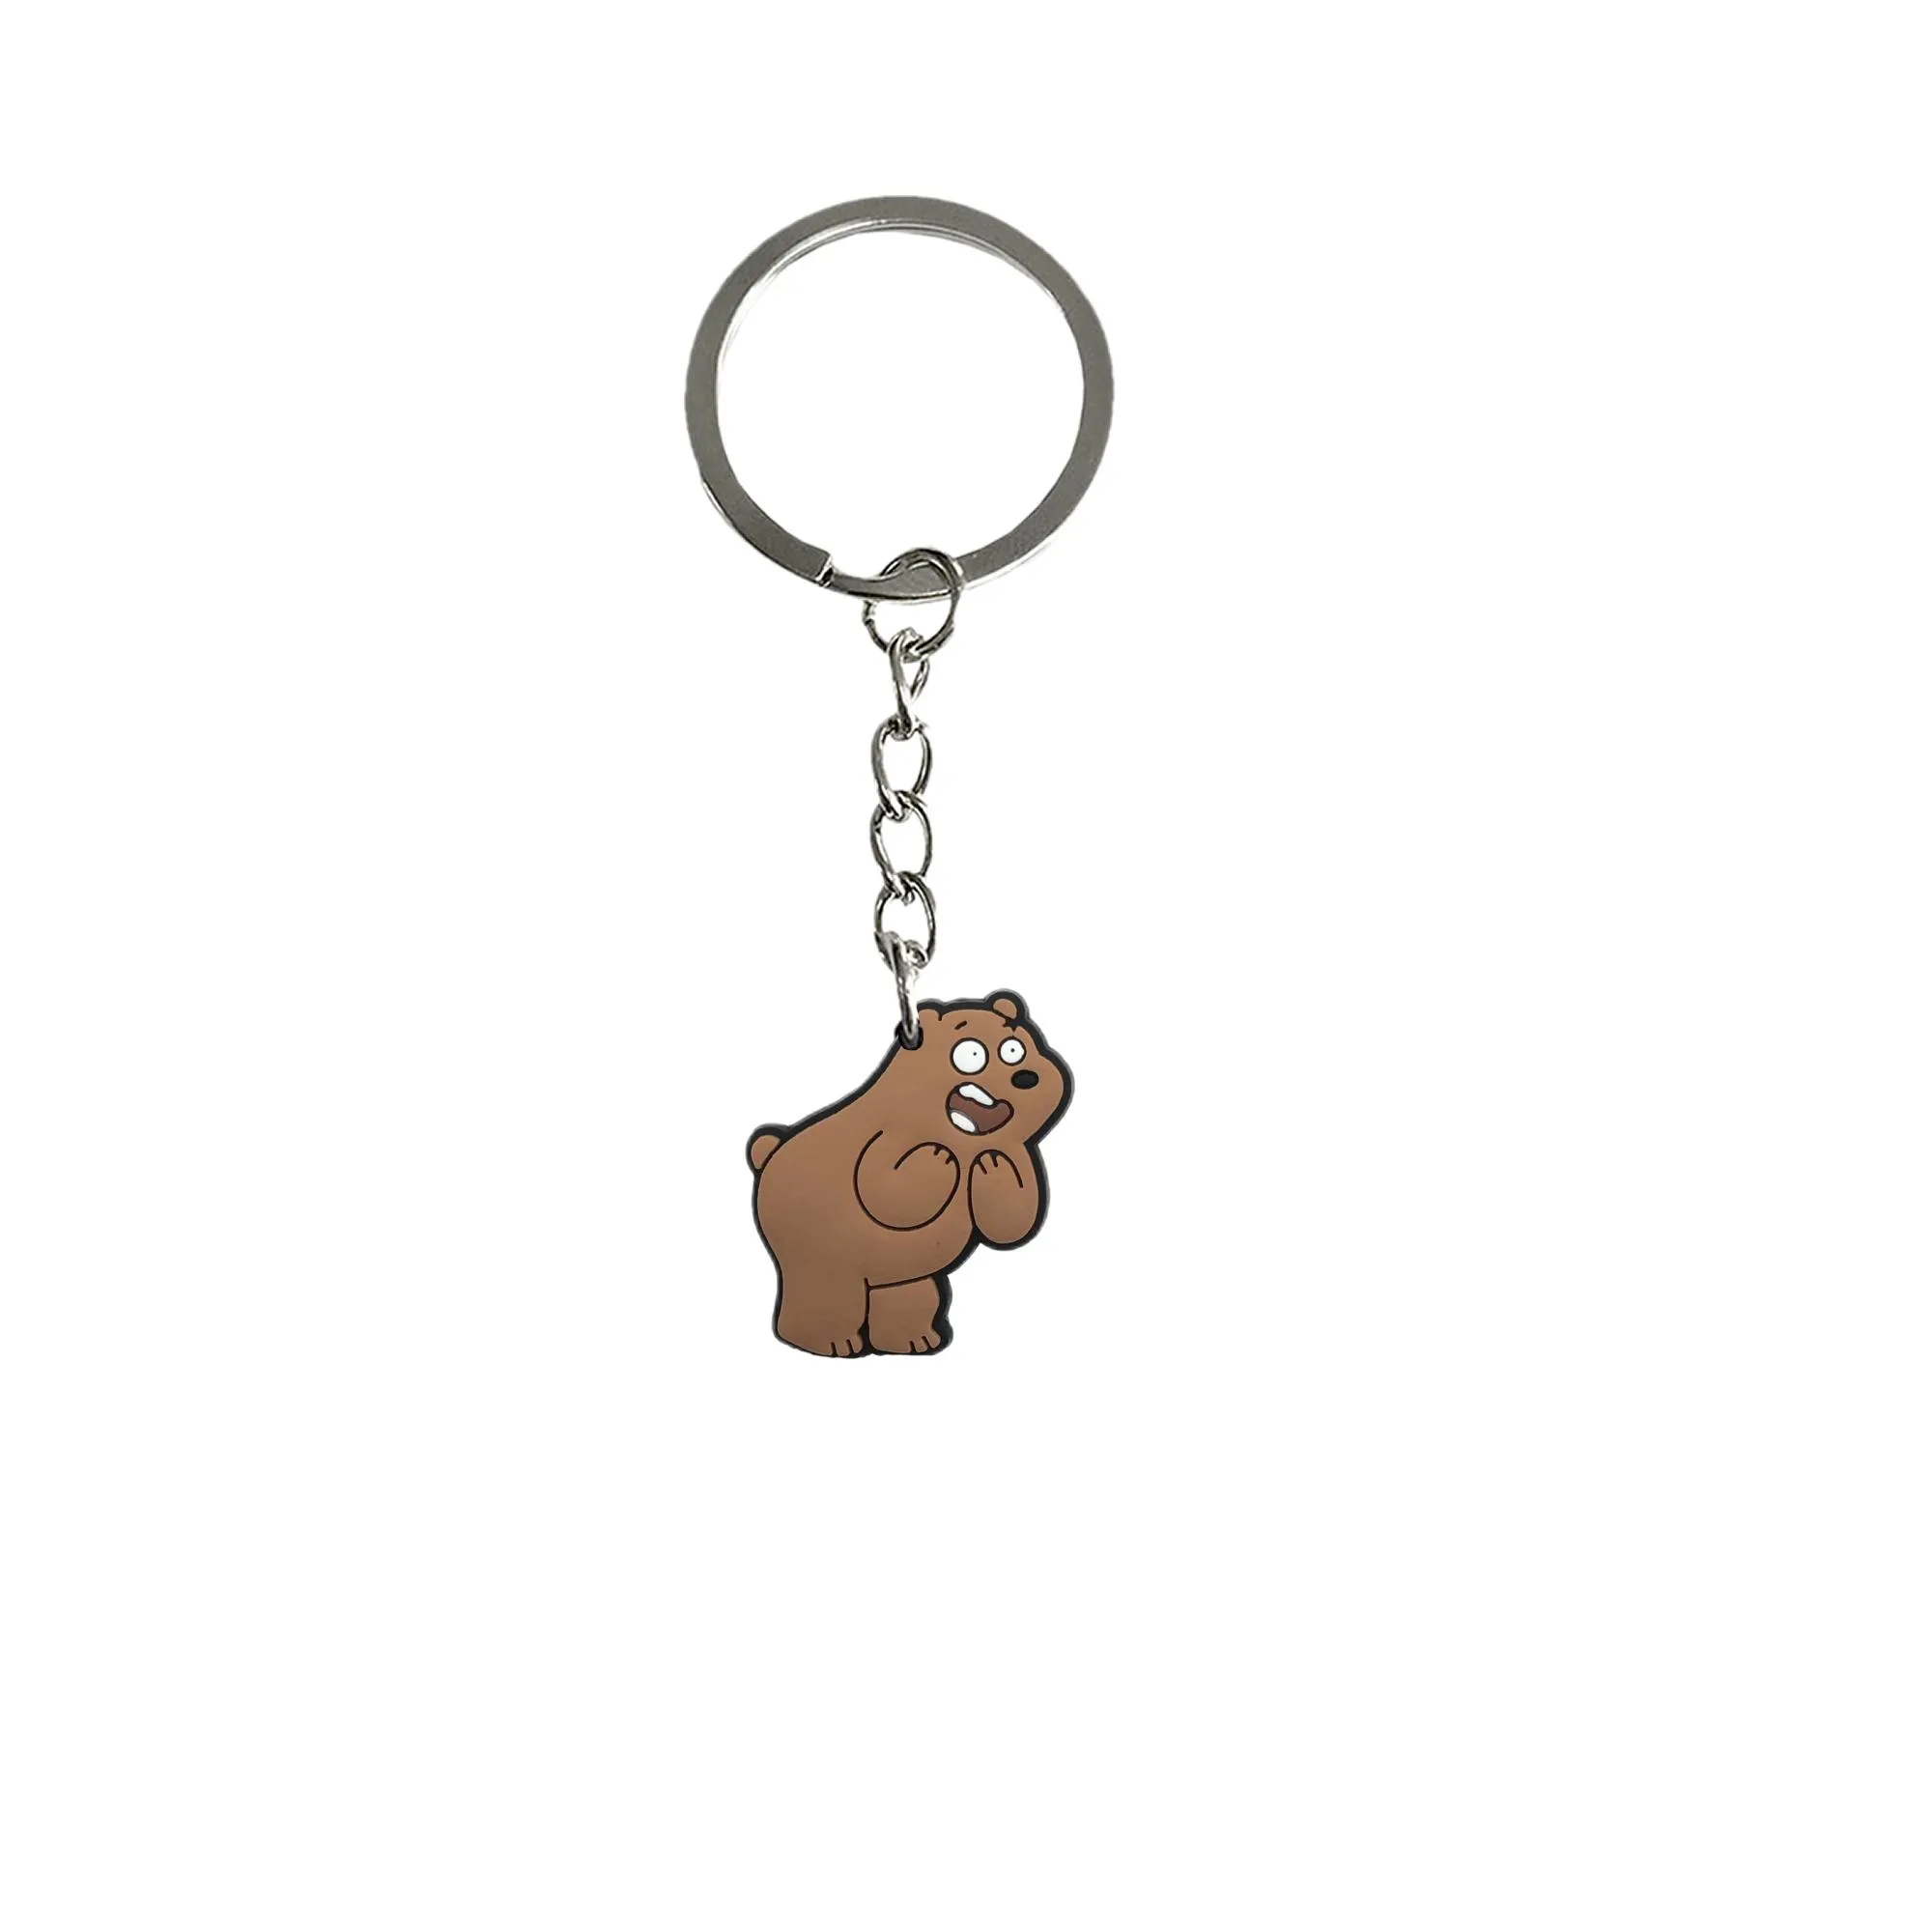 Keychains Lanyards Three Naked Bears Keychain Car Bag Keyring Key Ring For Men Chain Kid Boy Girl Party Favors Gift Suitable Schoolb Otzrx